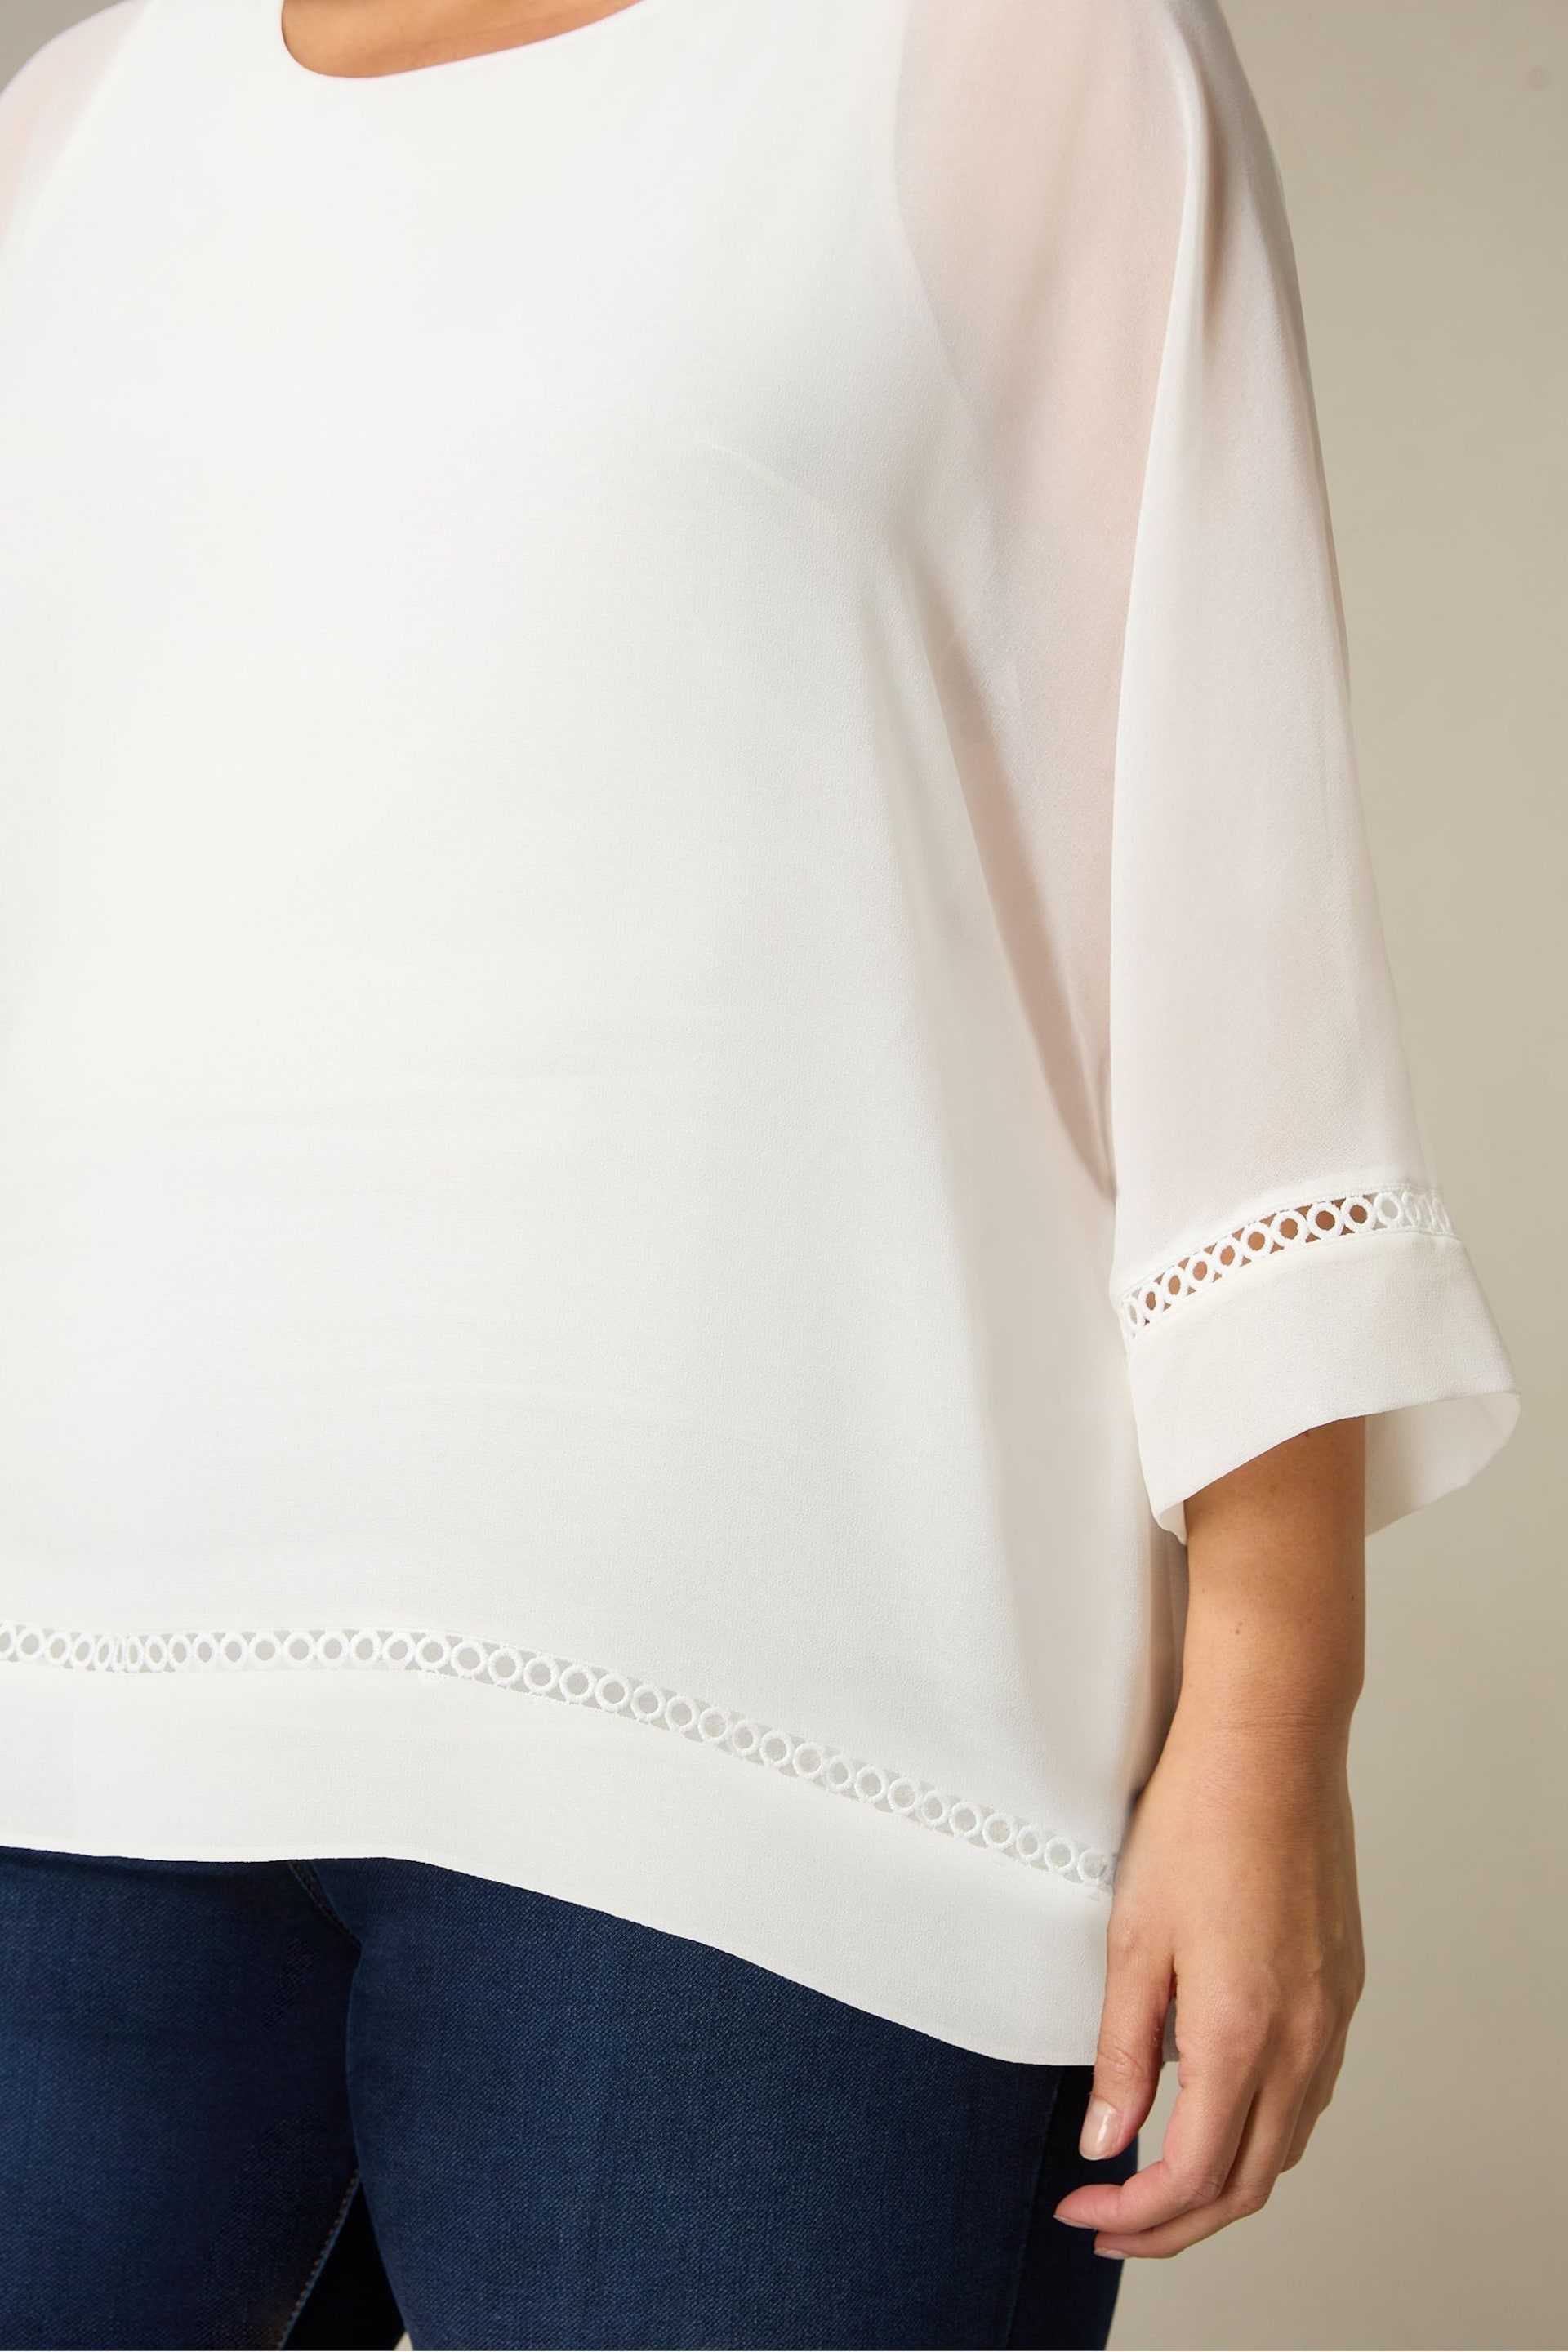 Live Unlimited Curve Chiffon Trim Insert Overlay White Top - Image 3 of 4